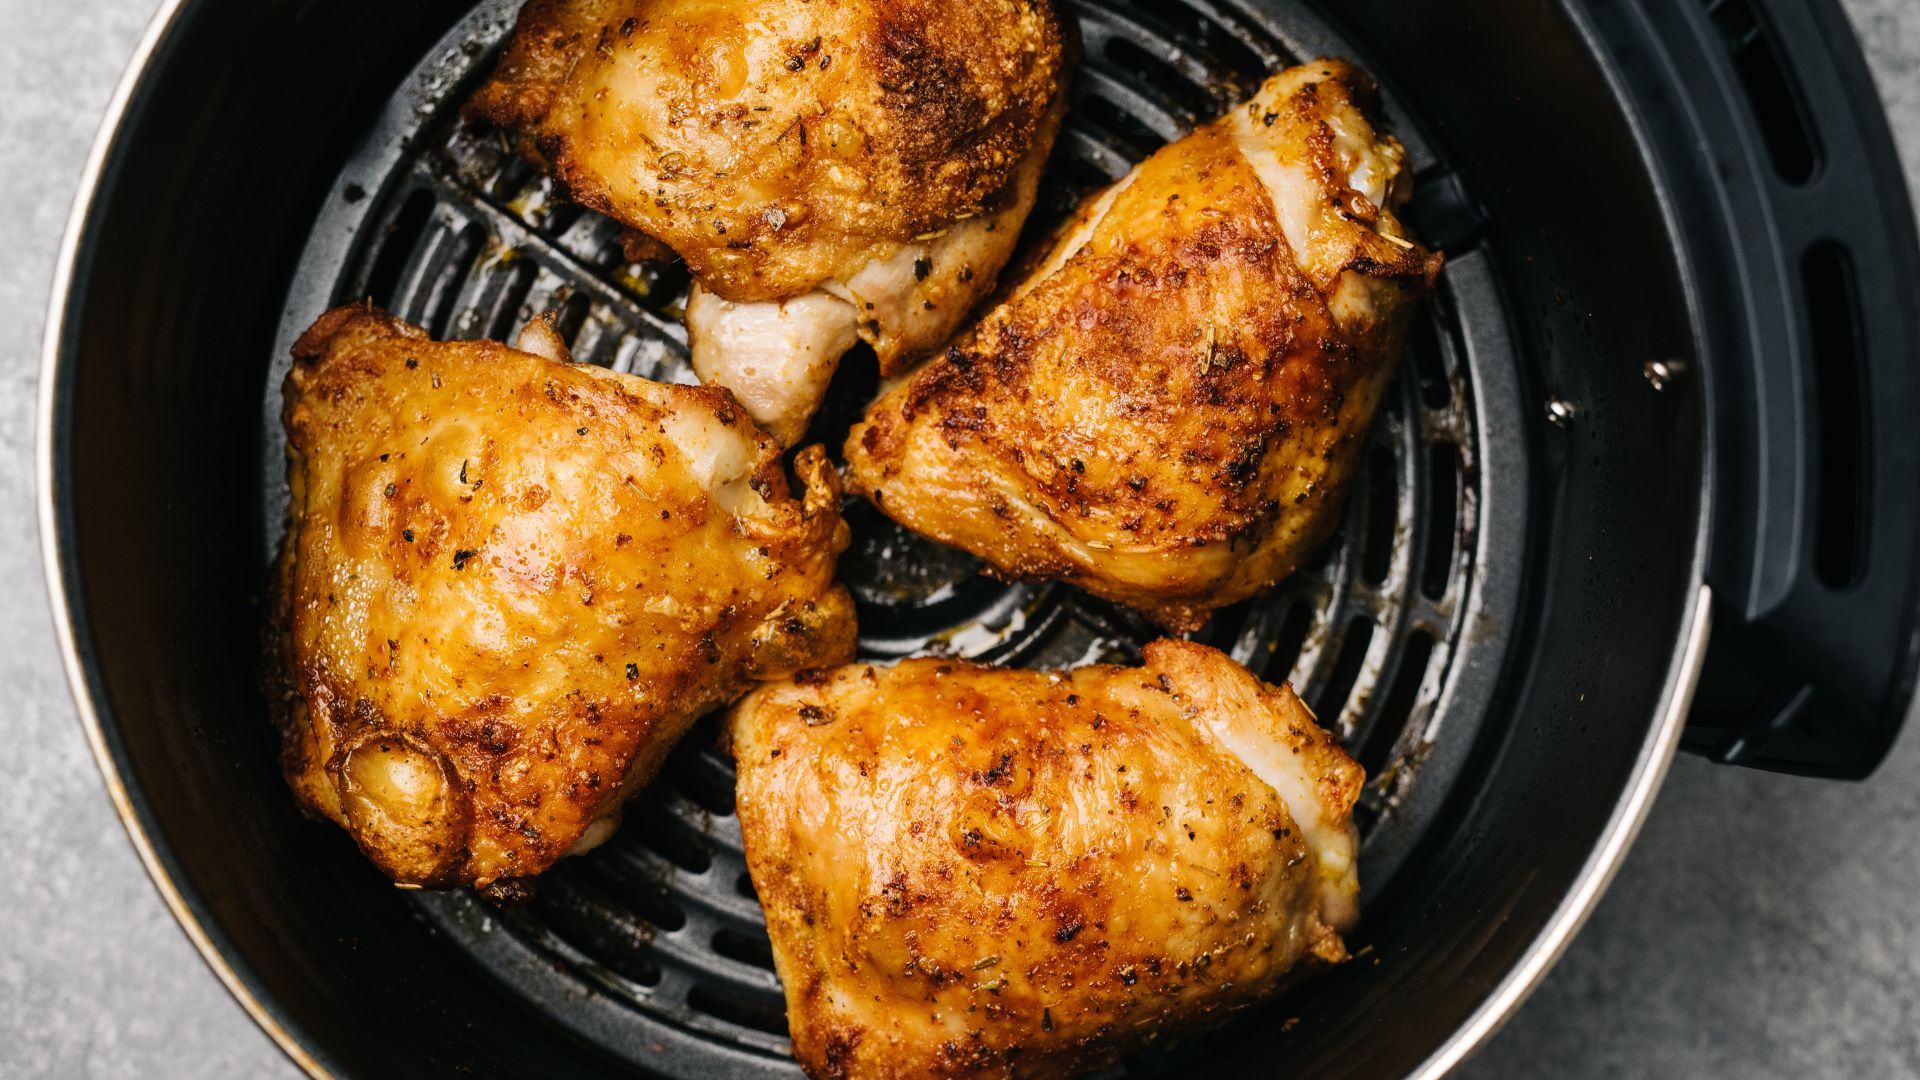 How to Use an Air-Fryer (Full Guide To Air-Frying)